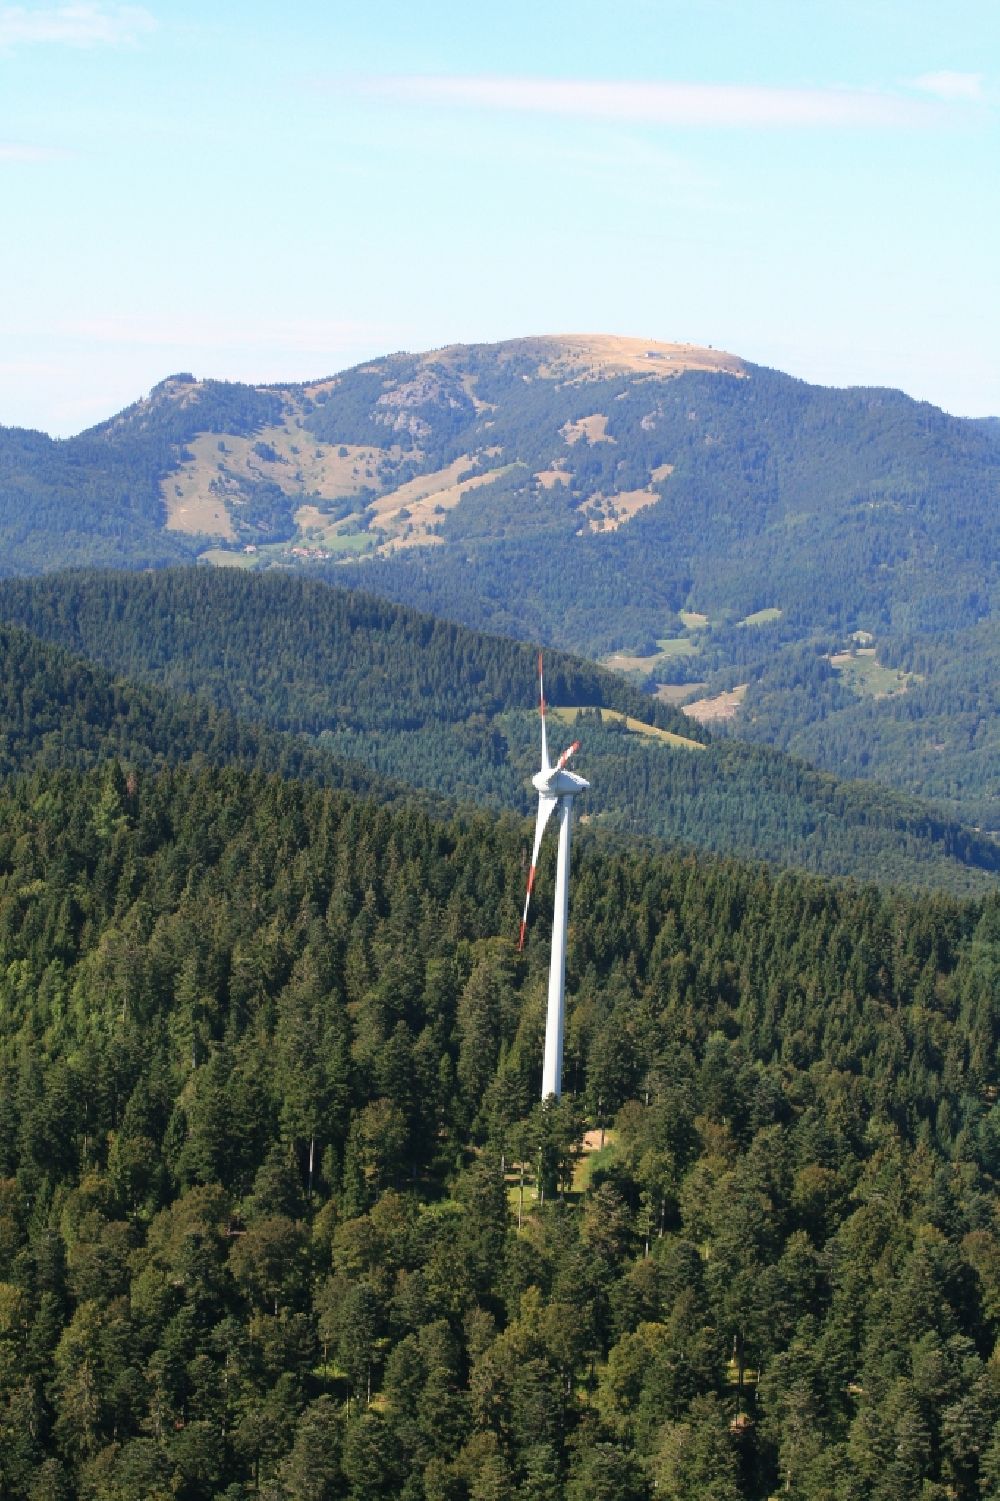 Fröhnd from the bird's eye view: Wind turbine generators (WTG ) - wind turbine in the Black Forest in Froehnd in the state of Baden-Wuerttemberg. View to the Belchen